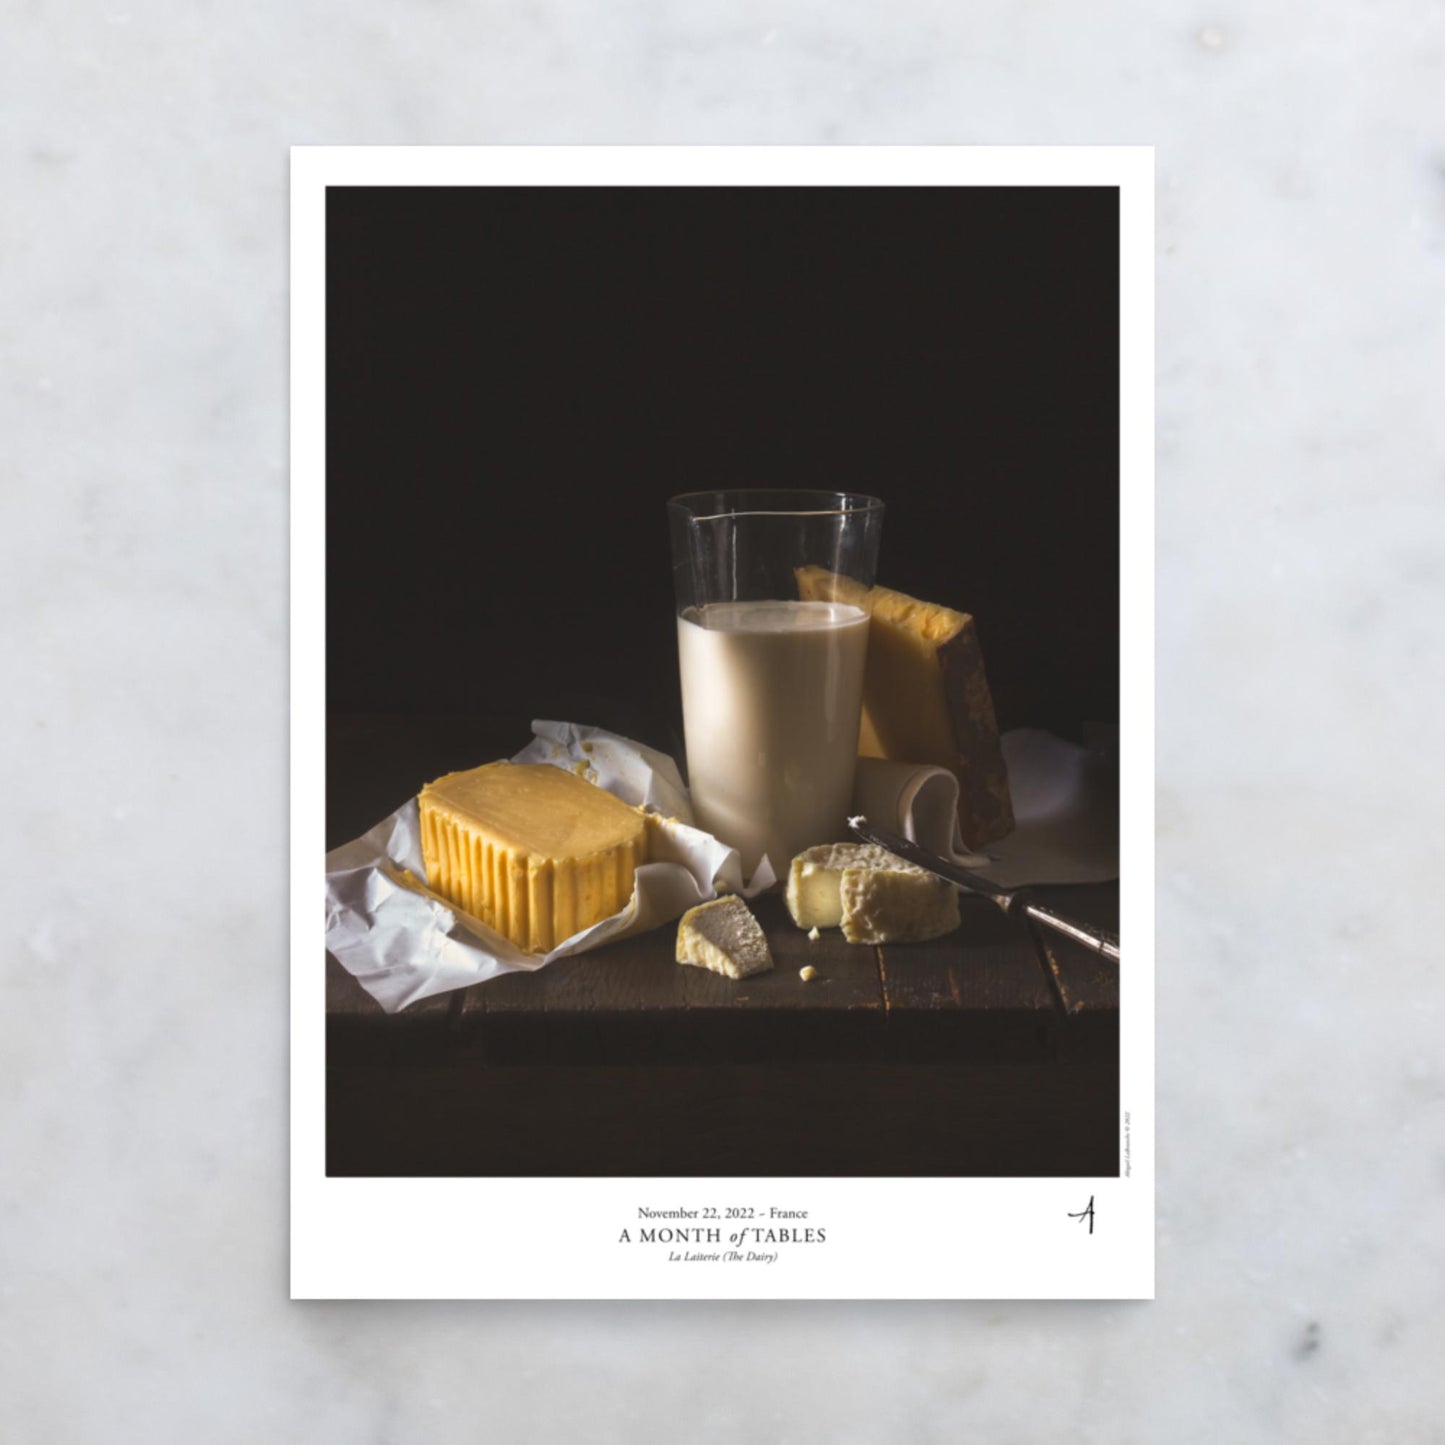 La Laiterie (The Dairy) Poster - A Month of Tables